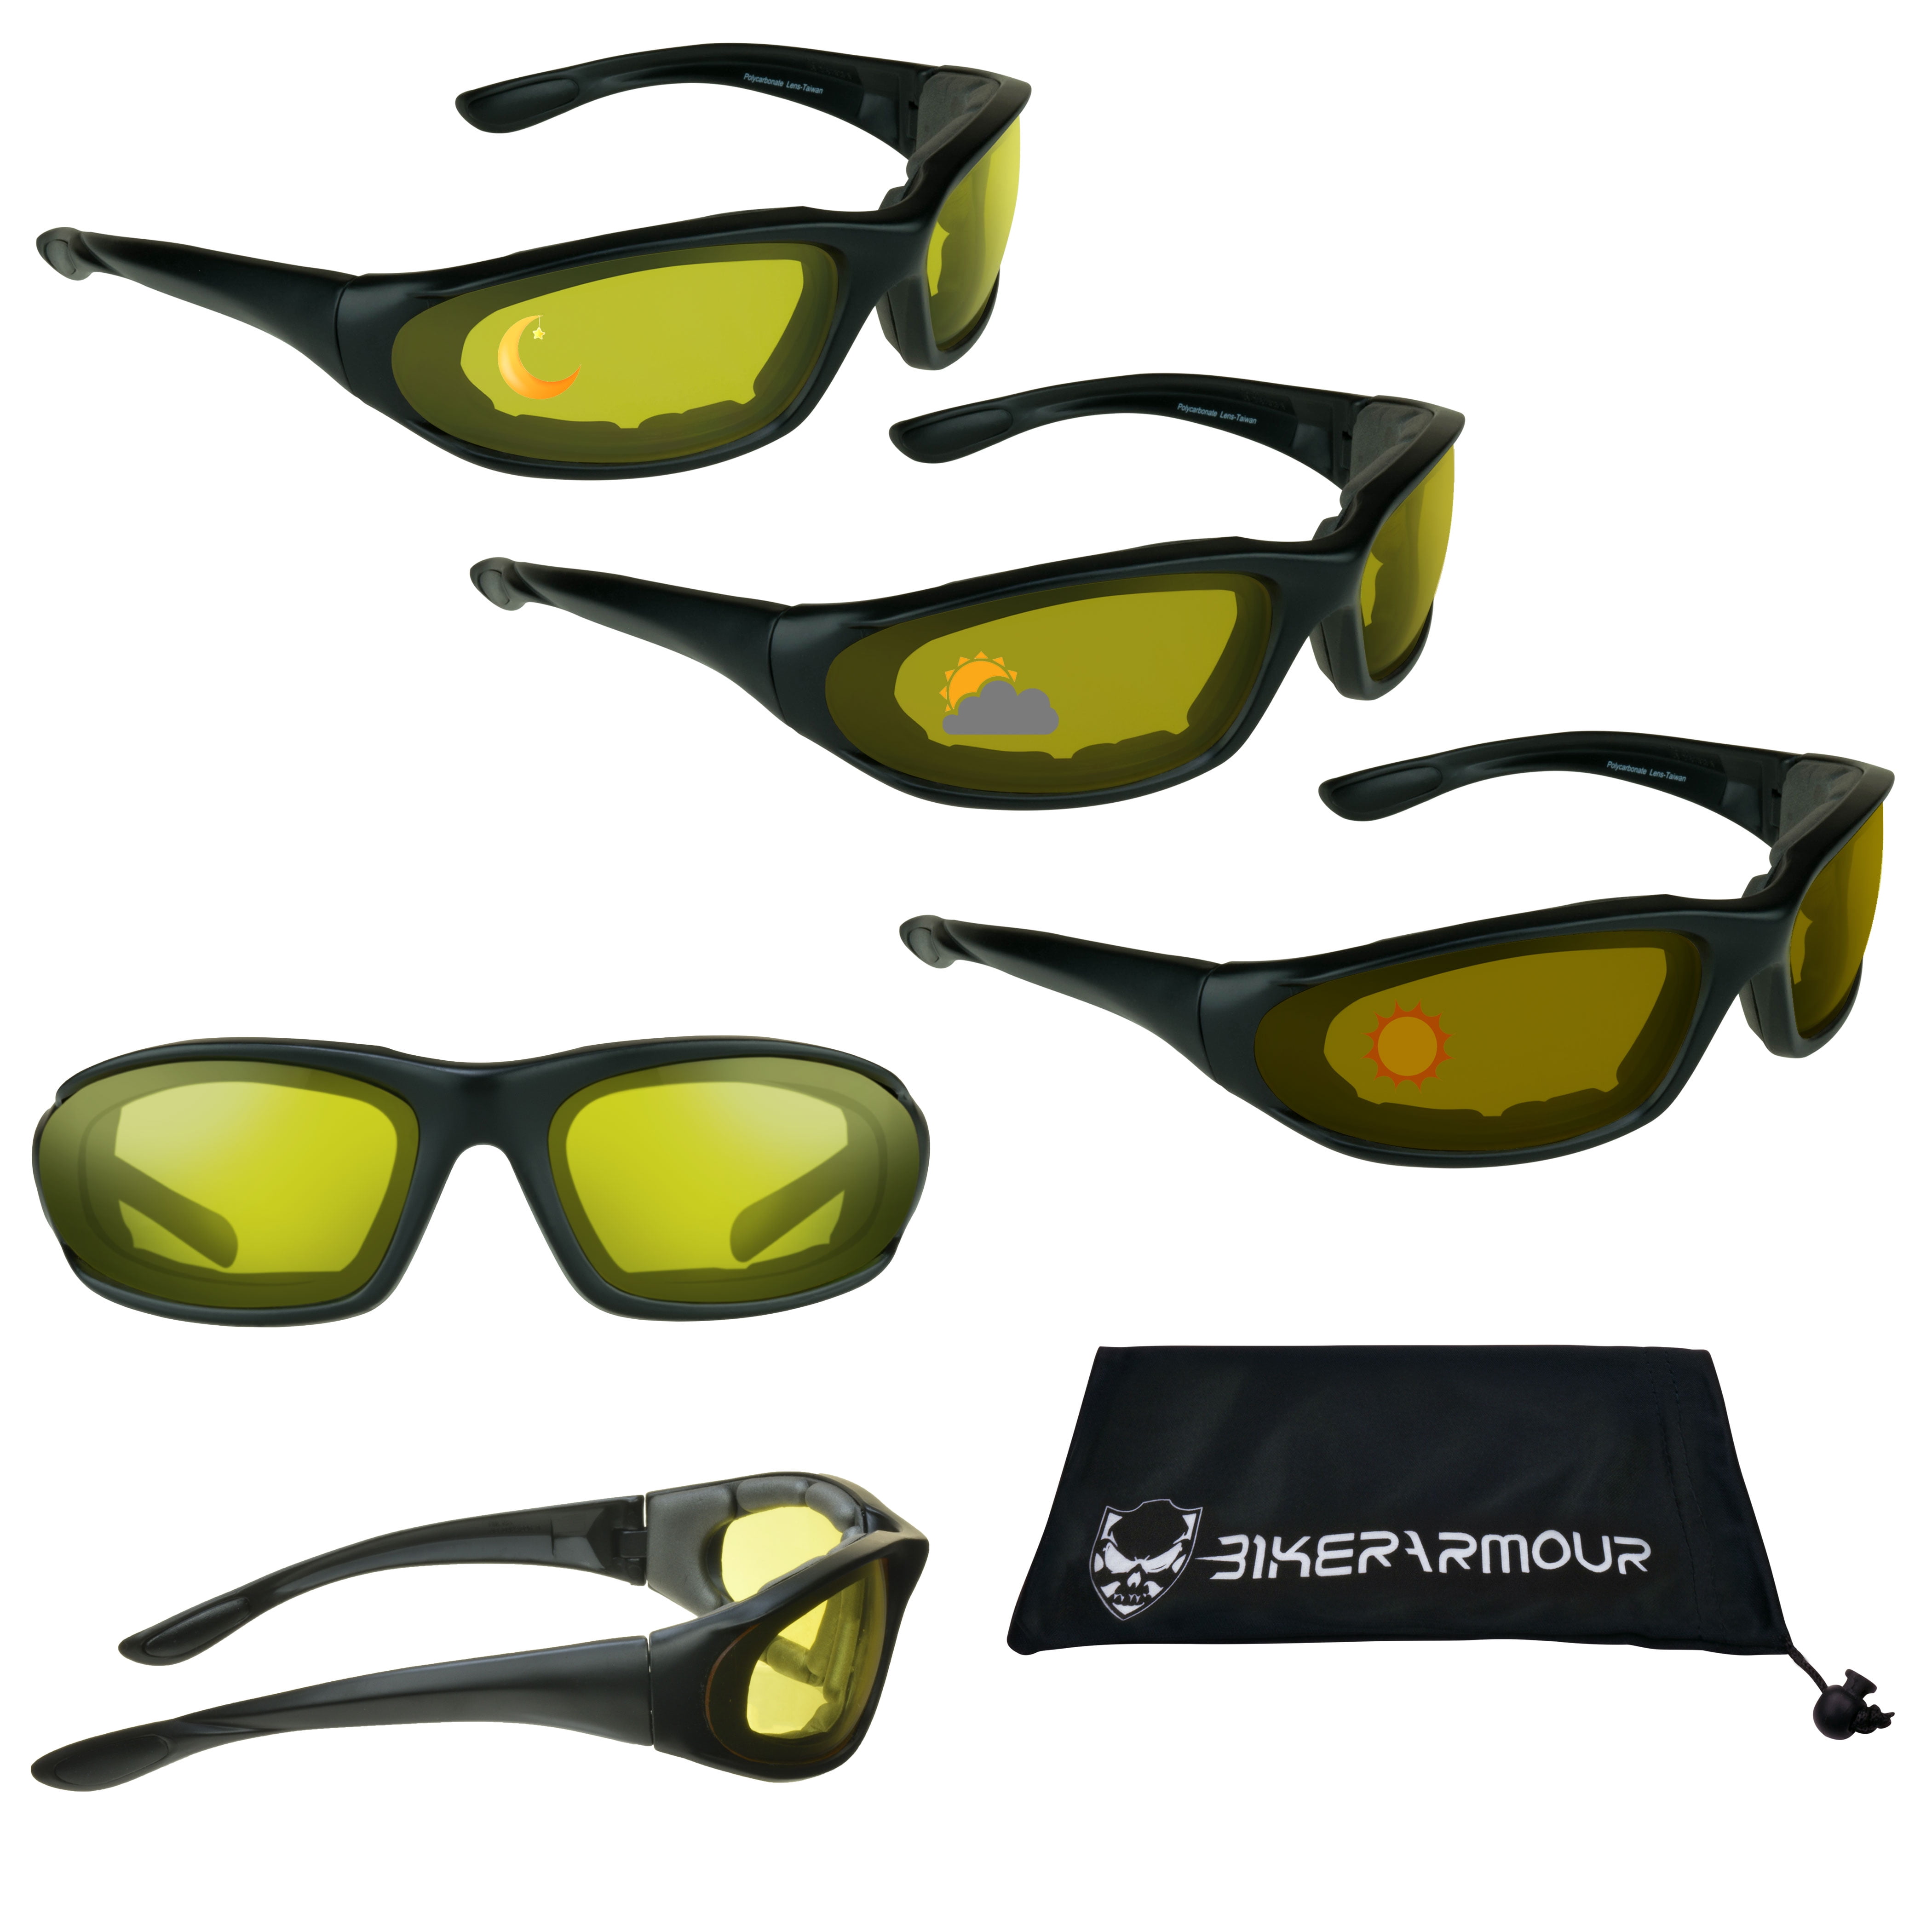 Bikershades Bikershades Transition Motorcycle Glasses For Men And Women Transitional